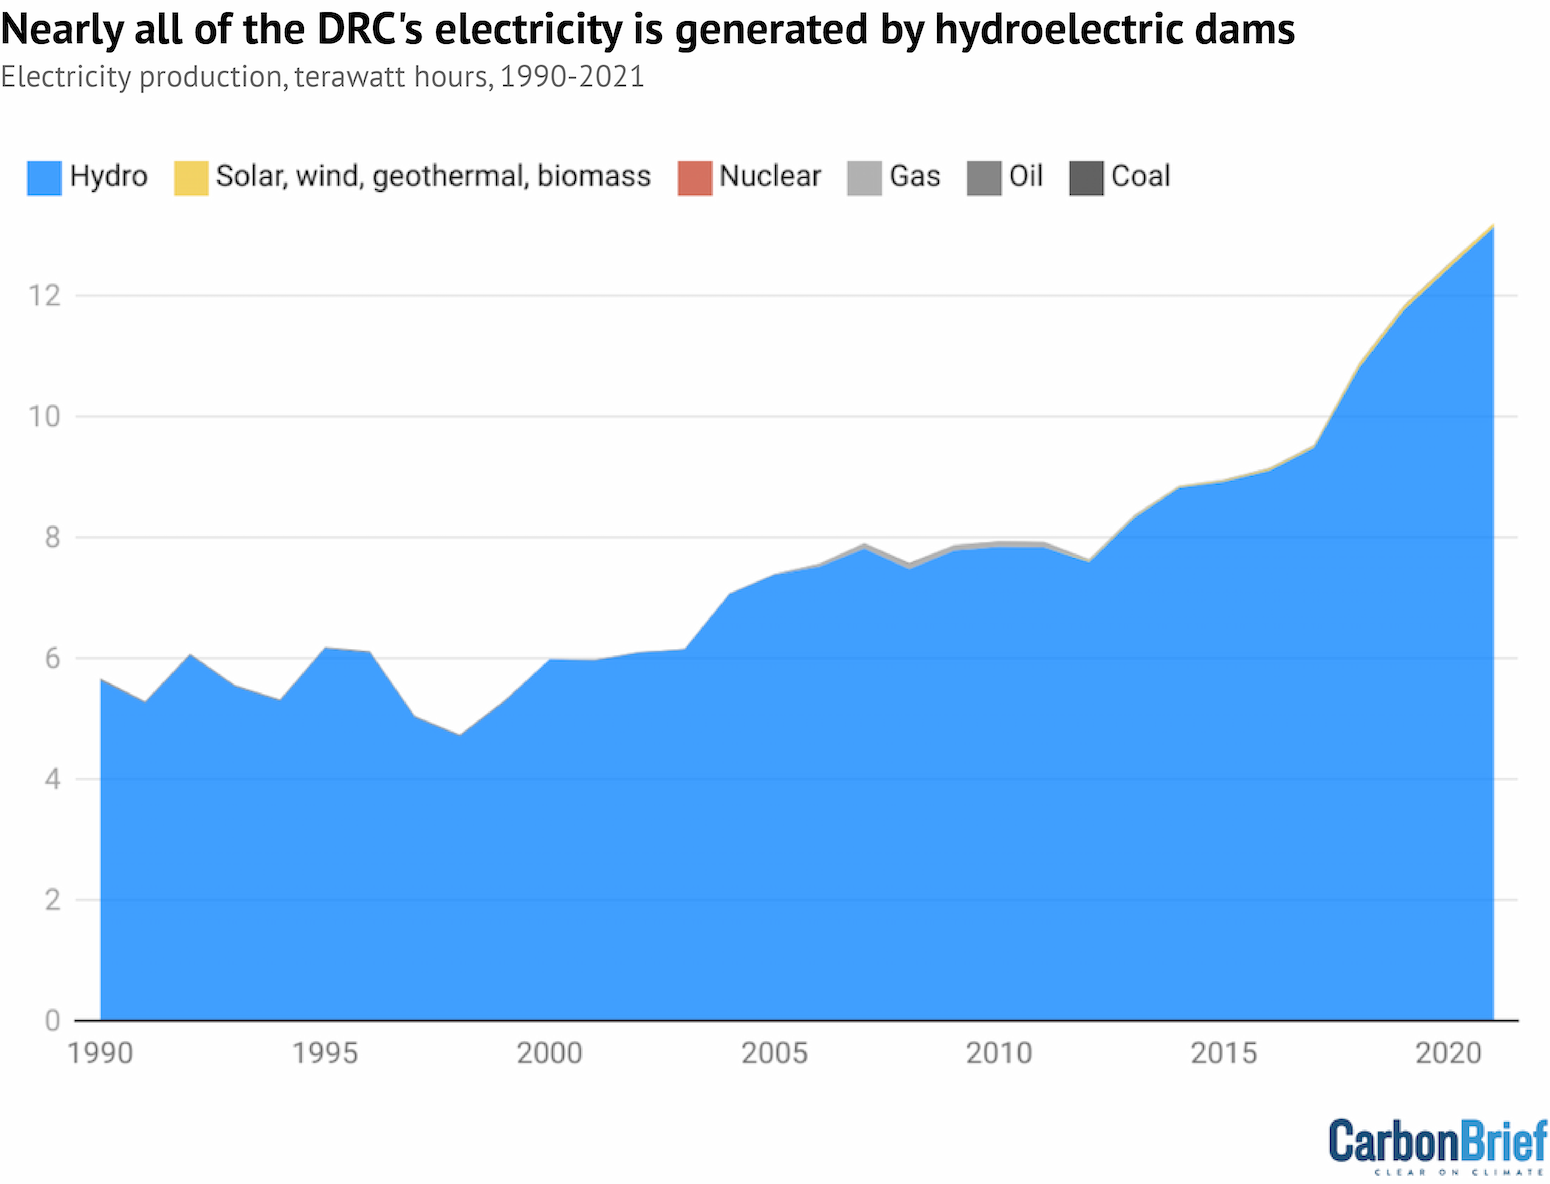 Electricity generation in the DRC by fuel, 1990-2021, terawatt hours